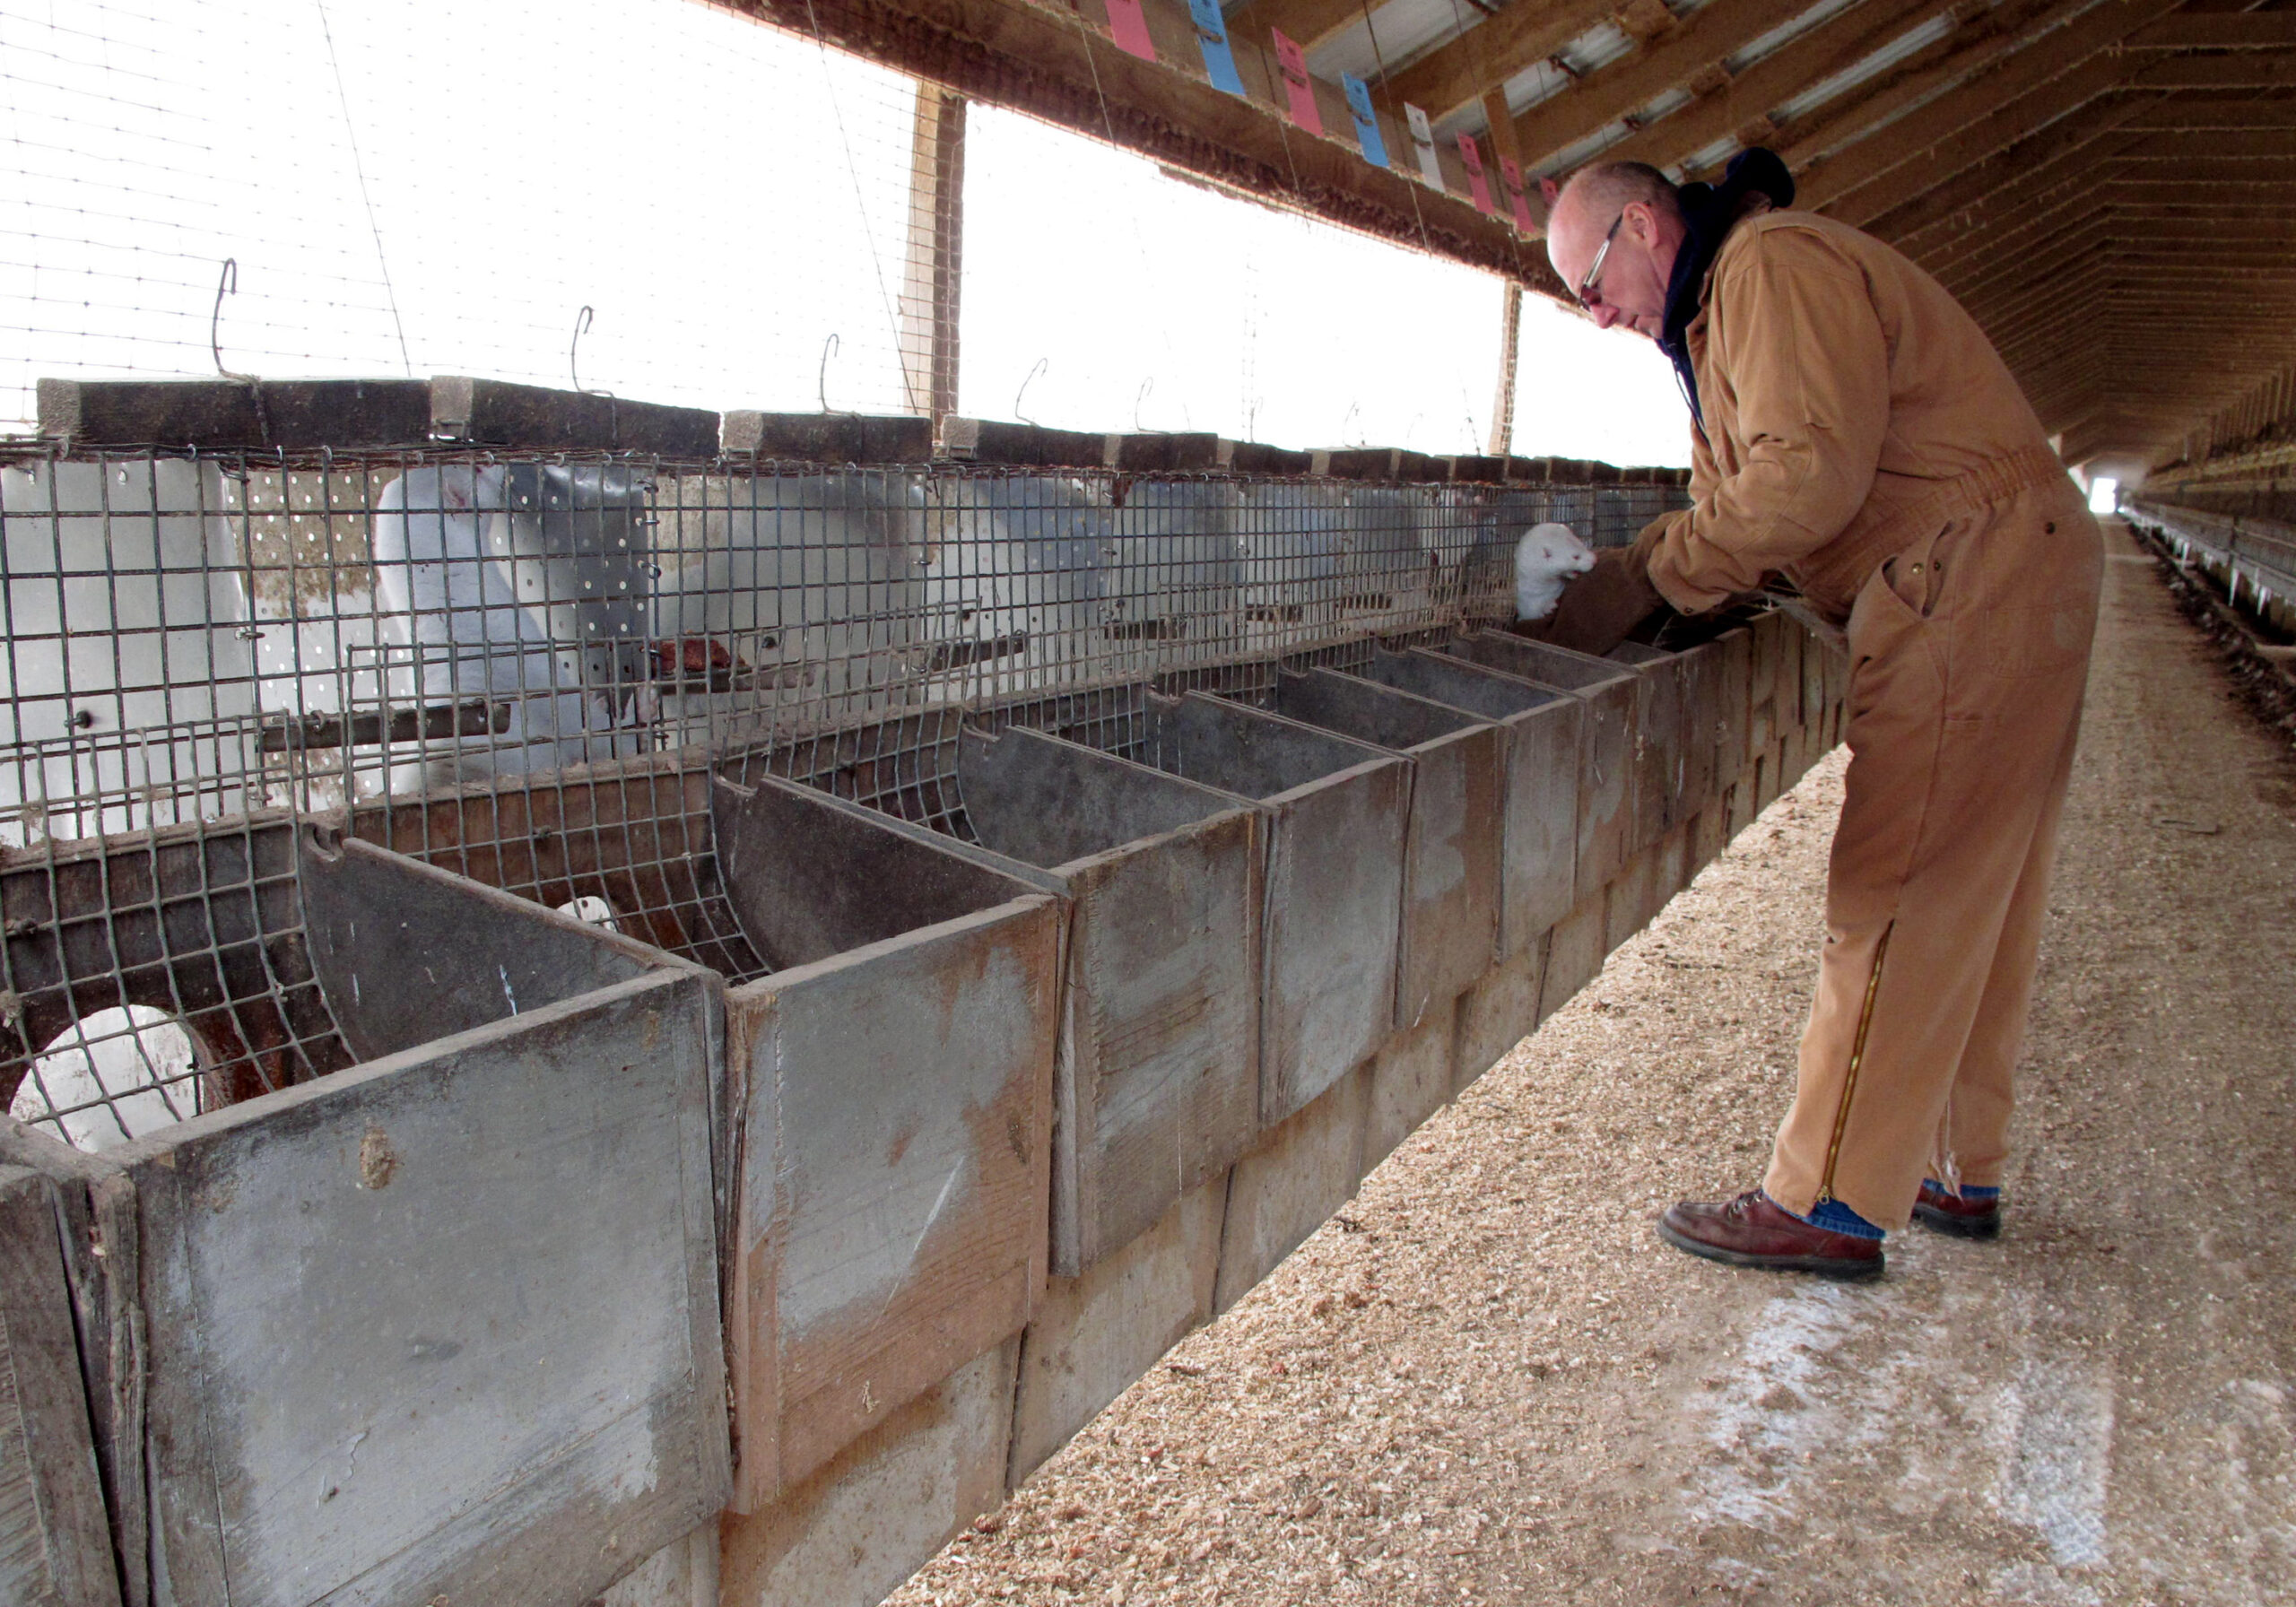 Wisconsin farms, GOP push back on mink industry ban